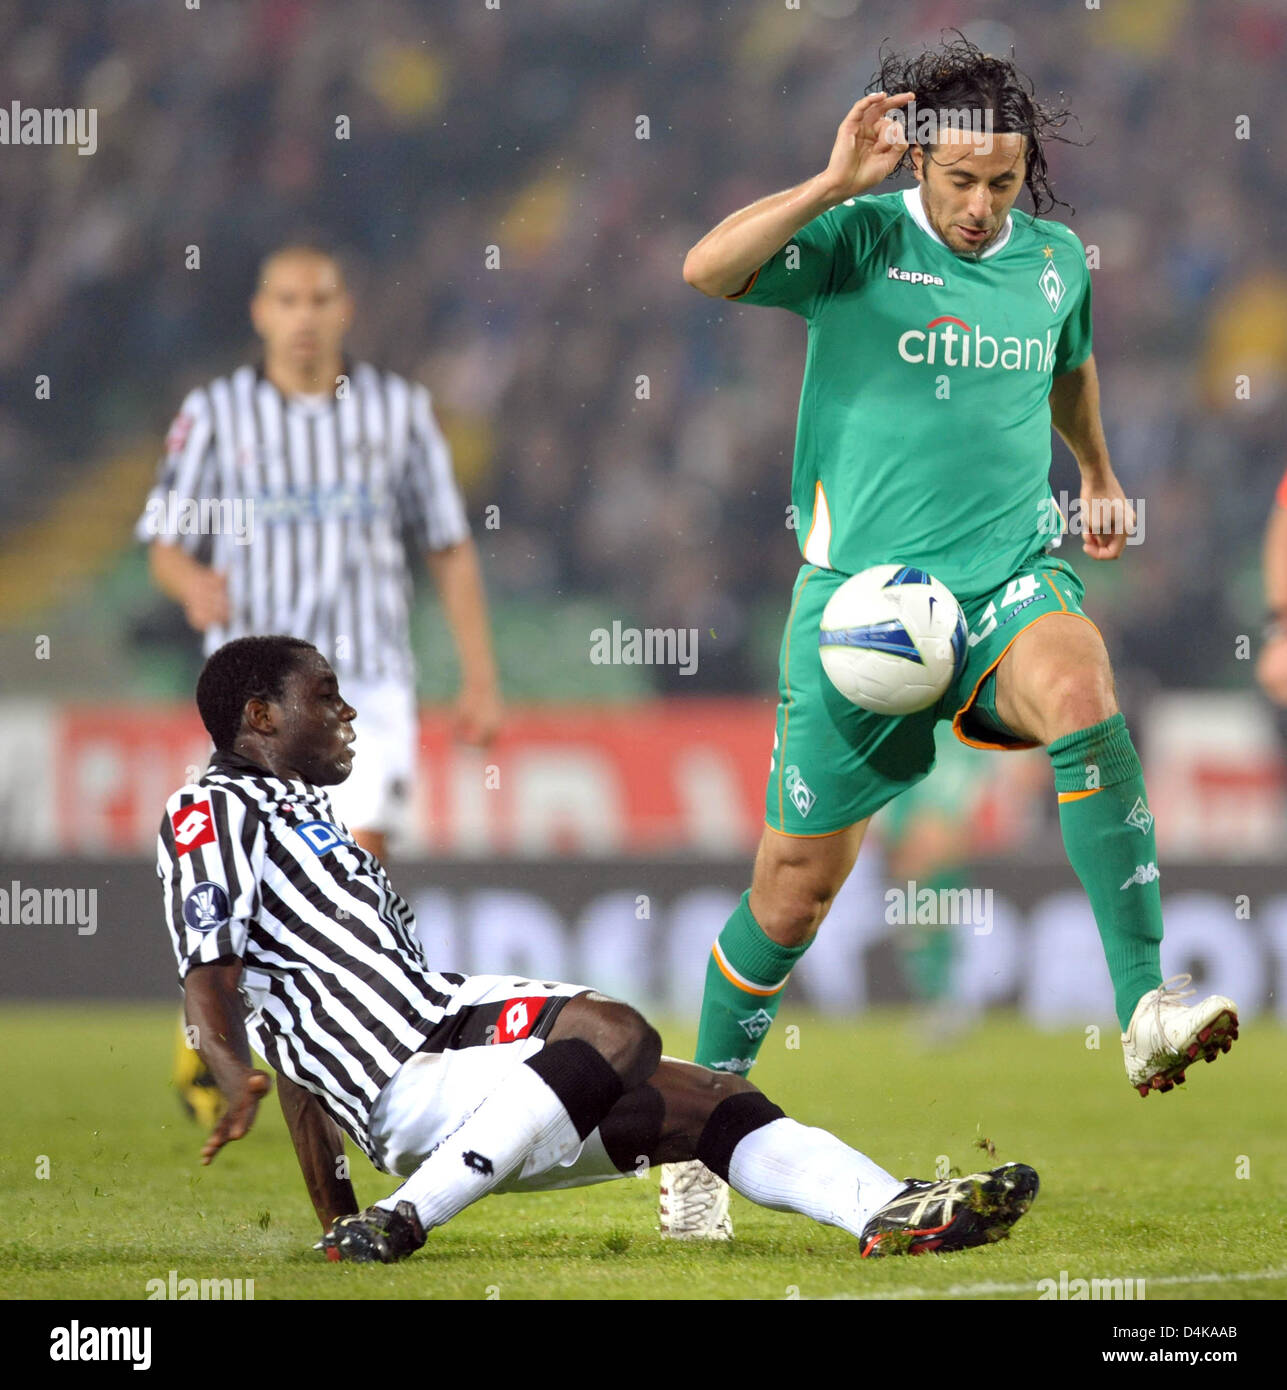 Bremen?s Claudio Pizarro (R) vies for the ball with Udinese?s Cristian Zapata during the UEFA Cup quarter finals second leg match Udinese vs Werder Bremen at Stadio Friuli in Udine, Italy, 16 April 2009. The match tied 3-3. Photo: Carmen Jaspersen Stock Photo